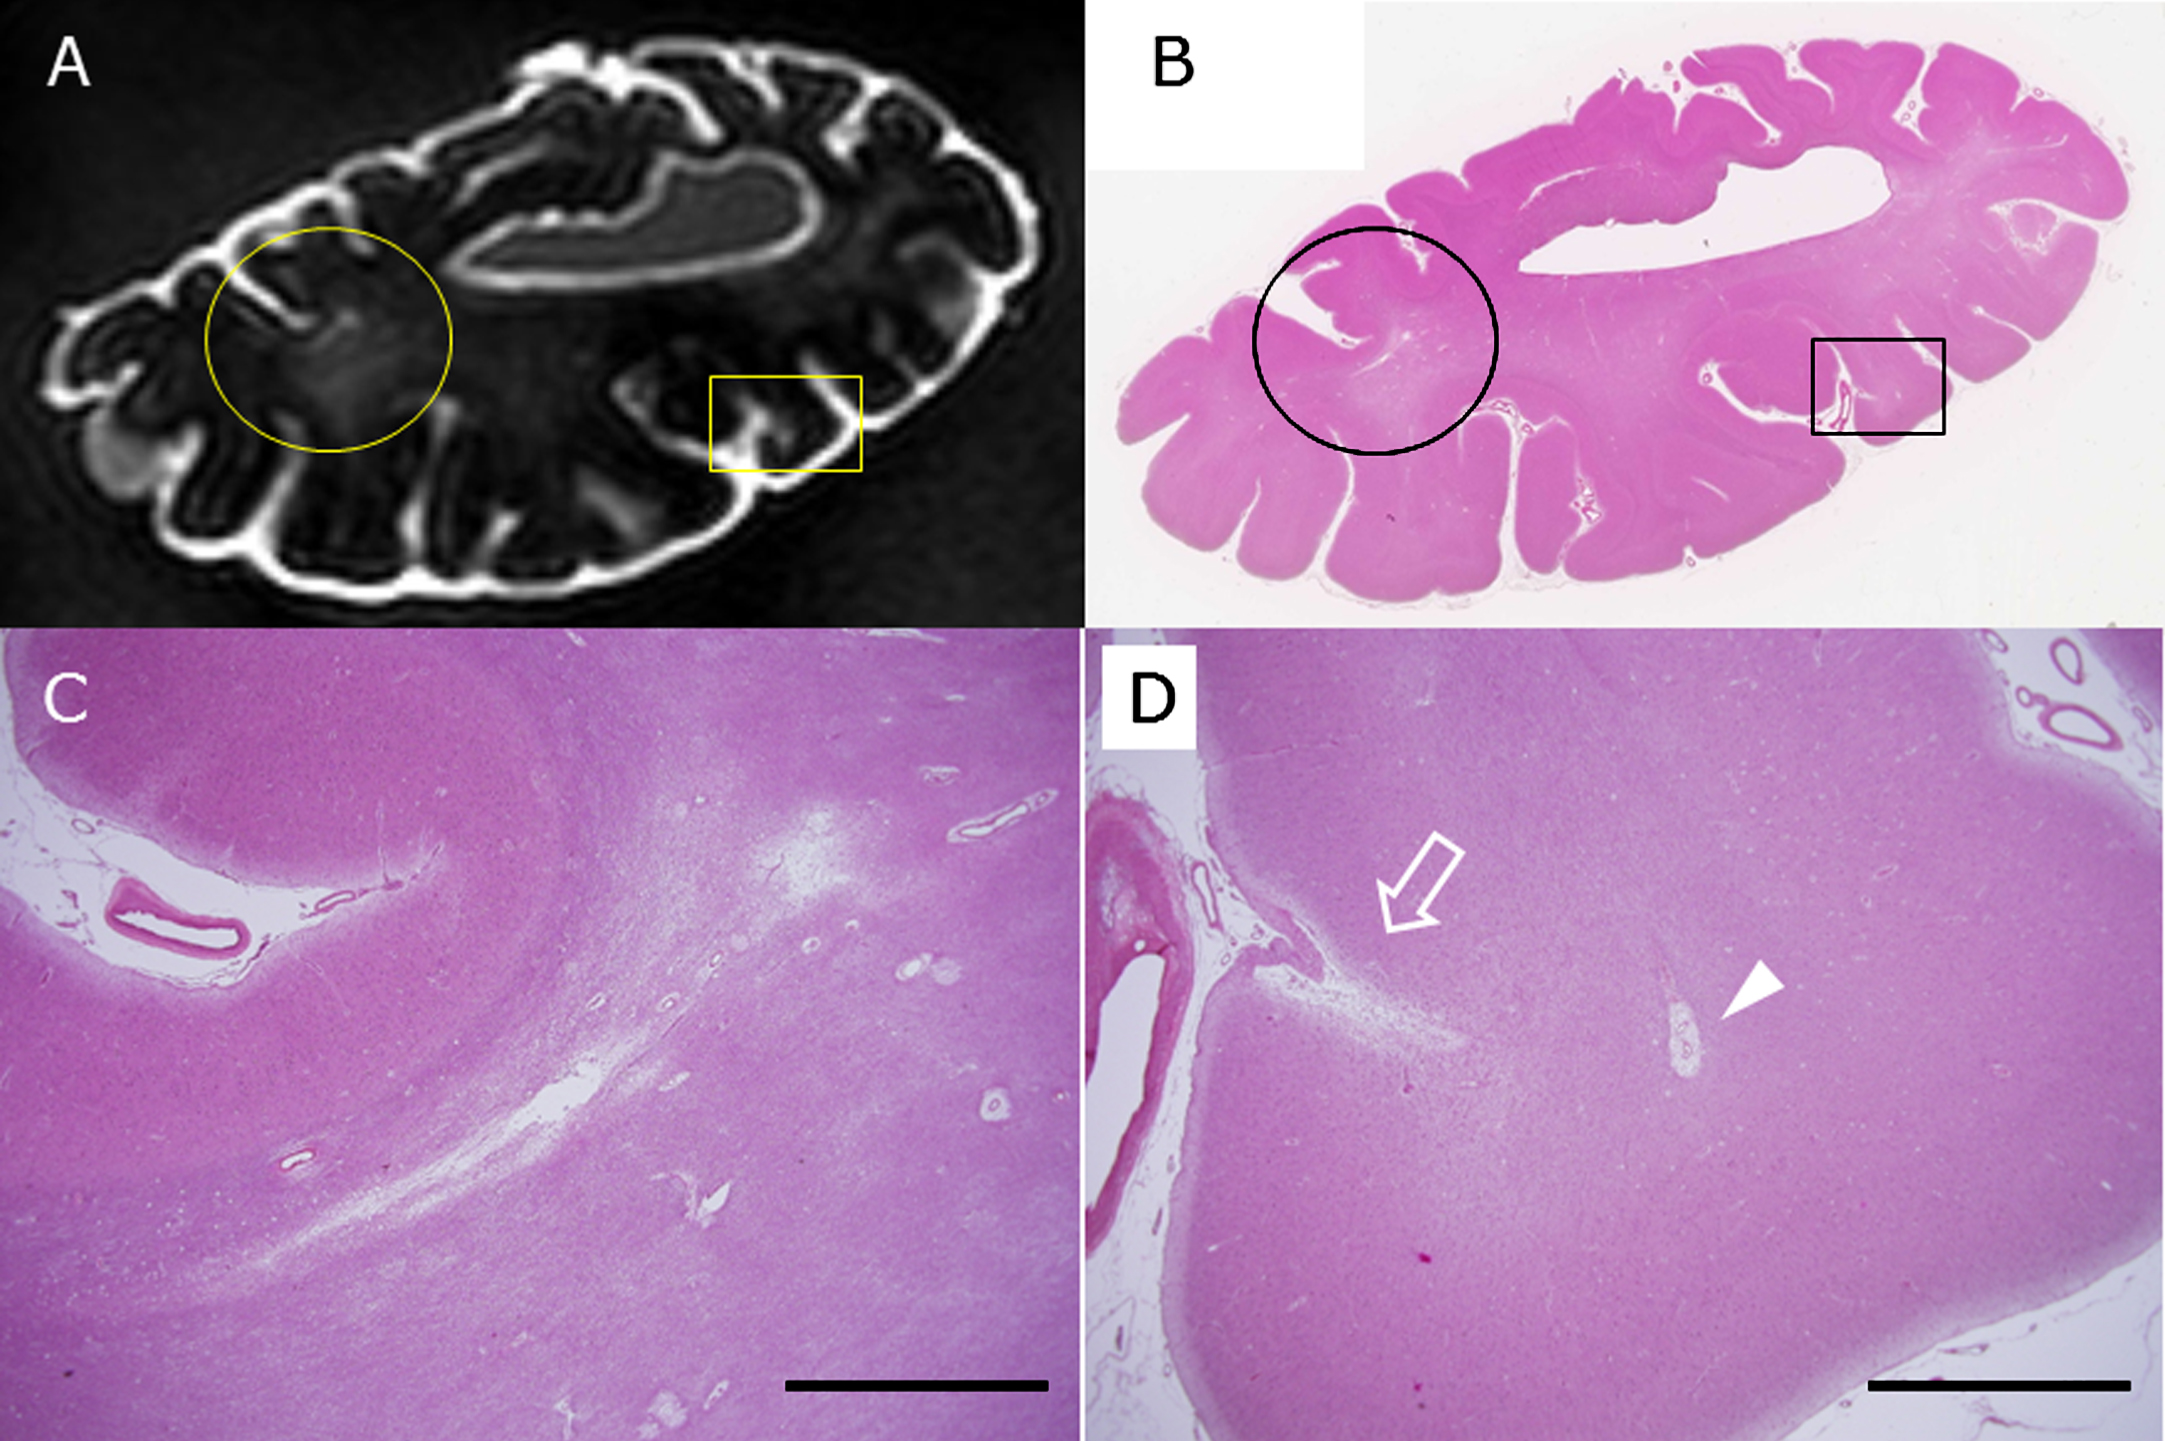 The circle and rectangle in A and B indicate a small subcortical infarction and a CMI, respectively. The circle is enlarged in C, and the rectangle is in D. The arrow indicates a CMI, and the arrowhead shows enlarged perivascular space (D) in the brain of subject C2 as detected by postmortem 3T MRI (A) and by HE staining of a section from the same block (B-D). Scale bars in C and D: 2 mm.